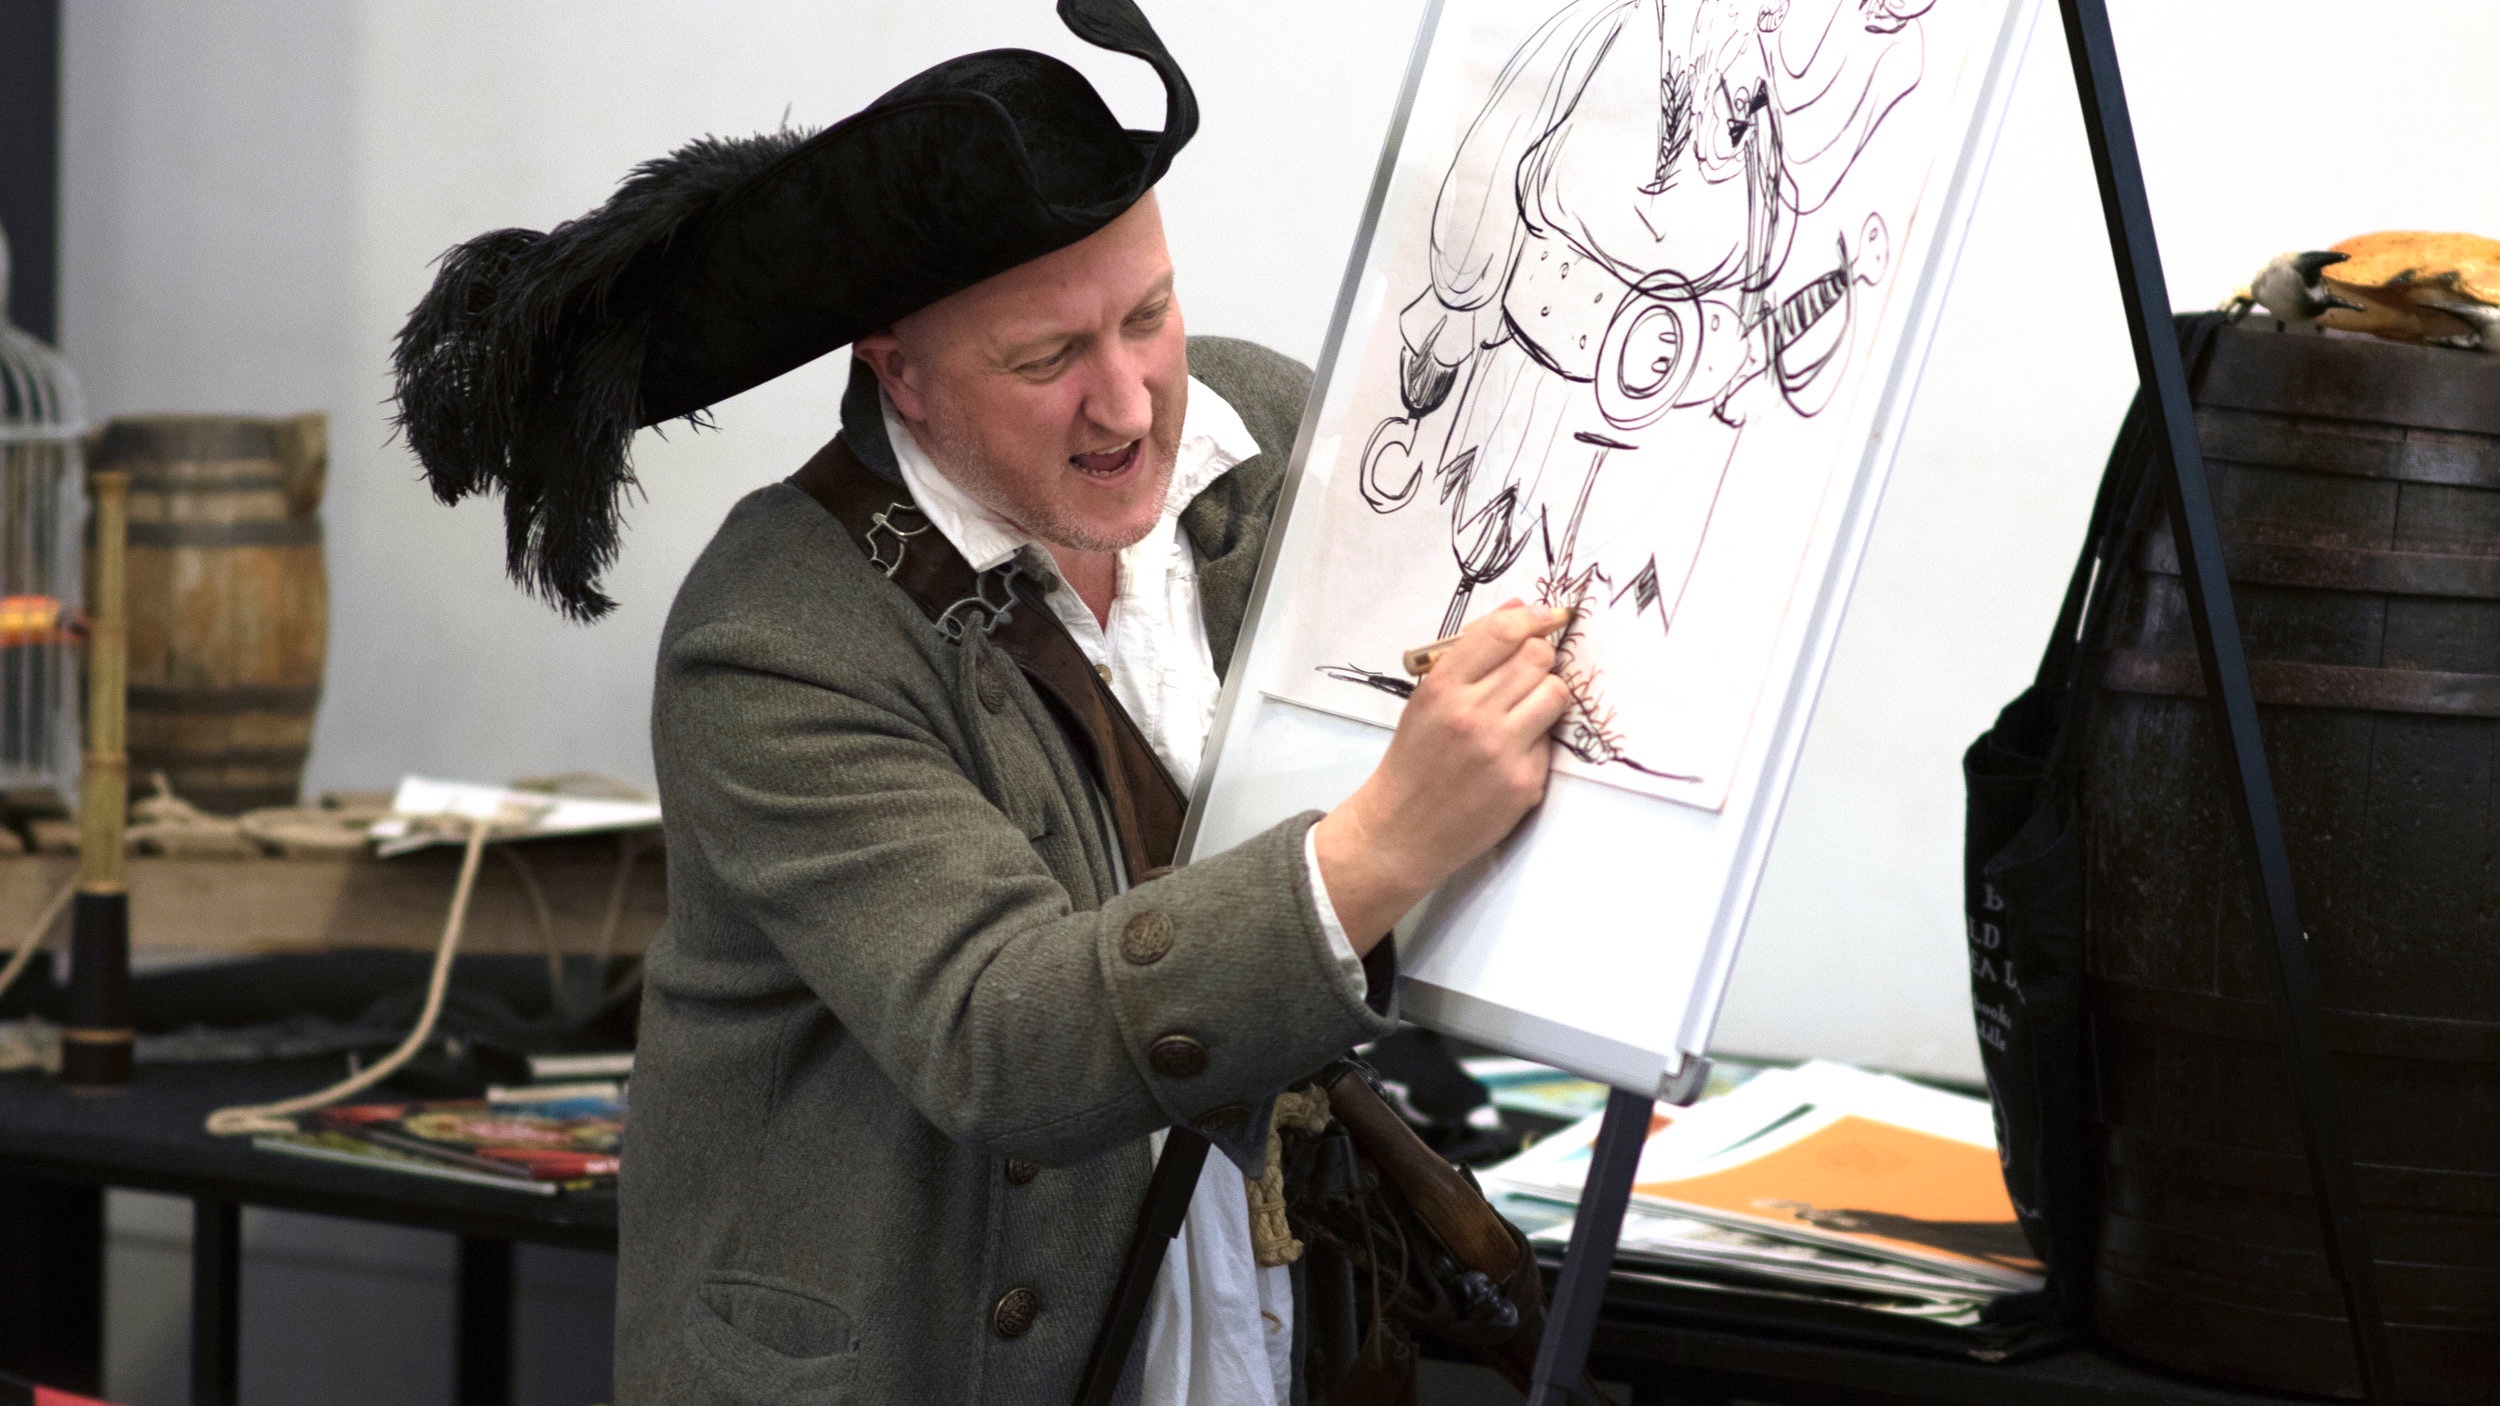 Johnny+Doddle+illustrates+at+Waterstones+The+Pirate+Cruncher.jpg